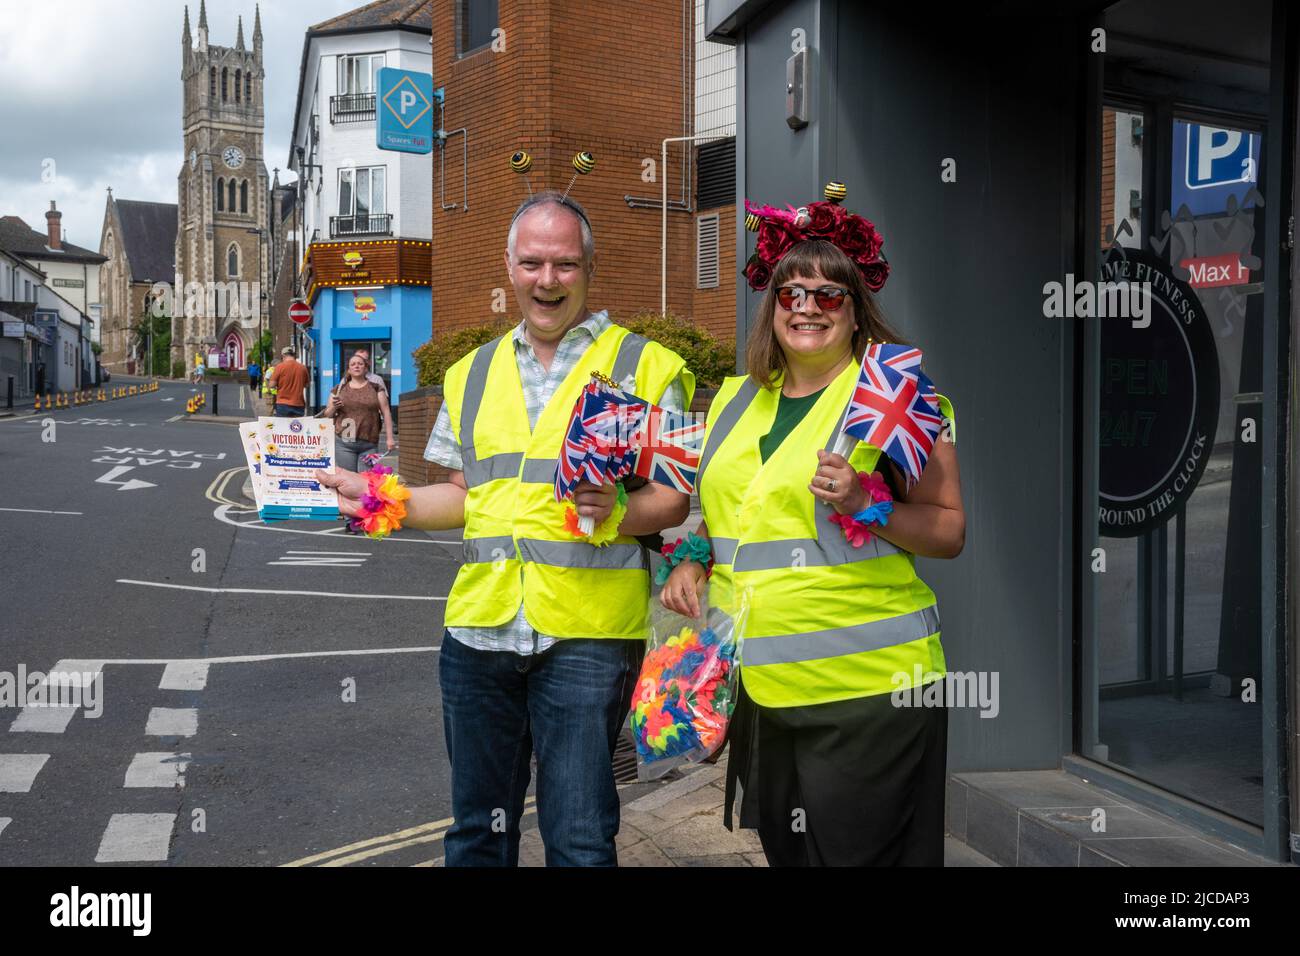 Volunteers handing out Victoria Day programmes and union jack flags at the annual event in Aldershot, Hampshire, England, UK, June 2022 Stock Photo